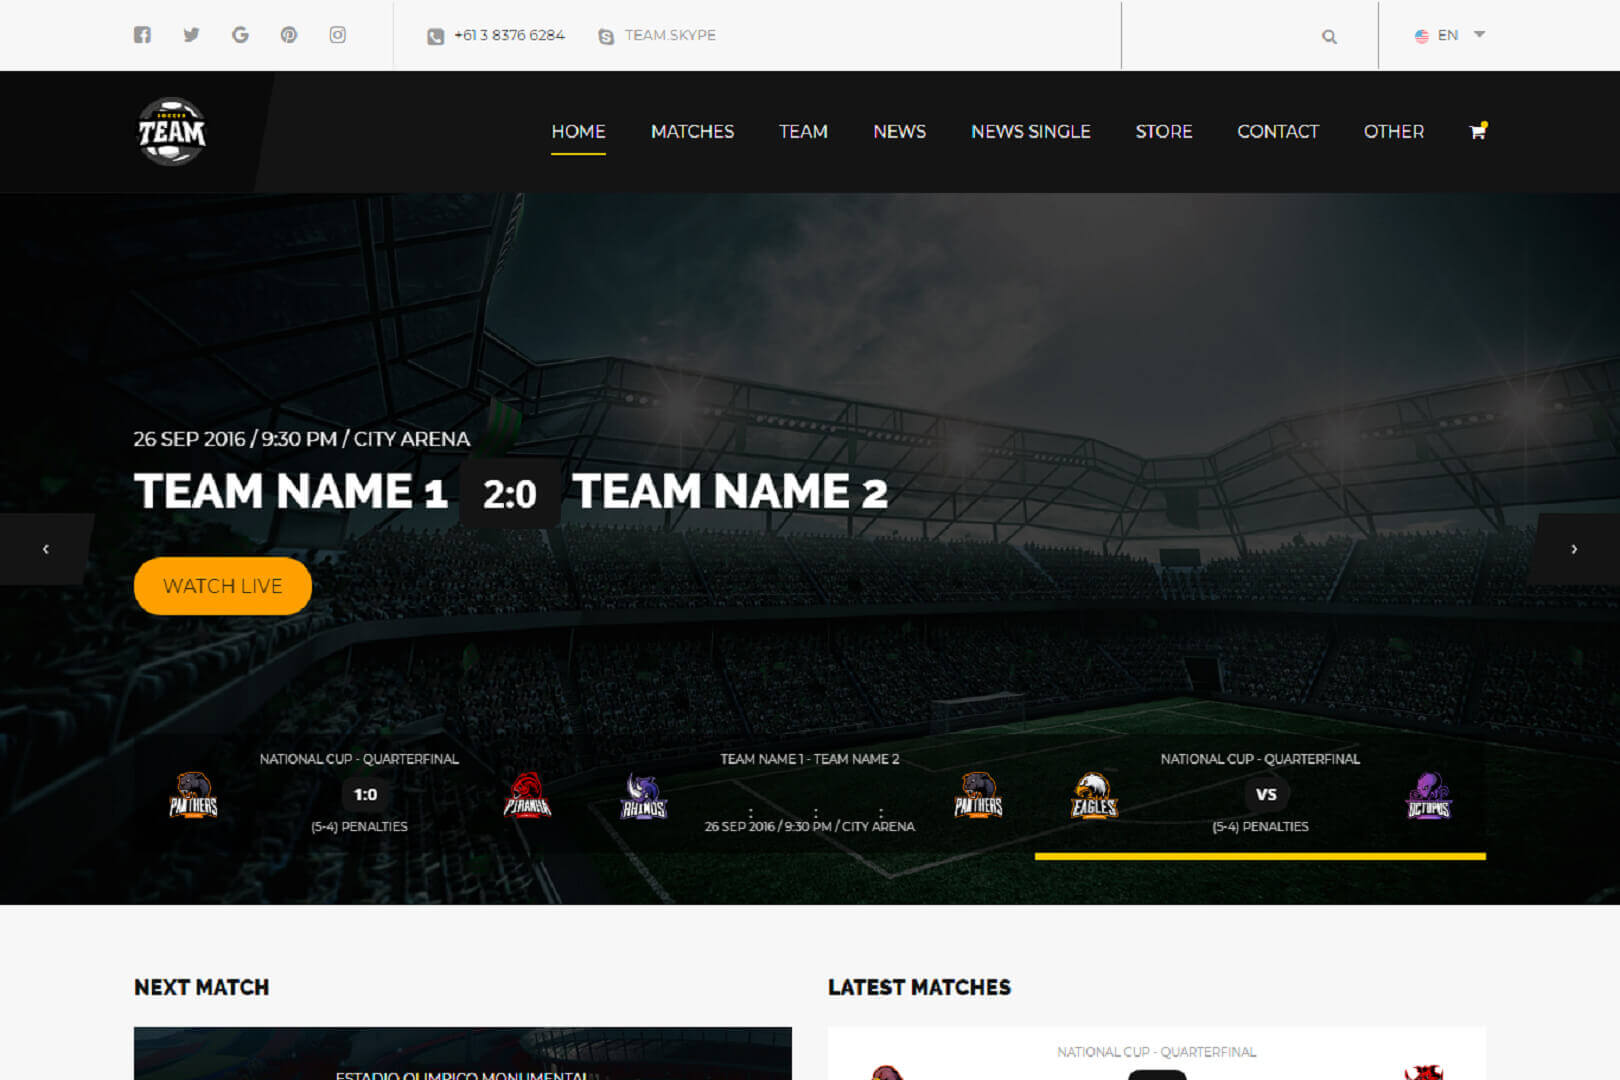 eSports - Game HTML5 Responsive Website Template